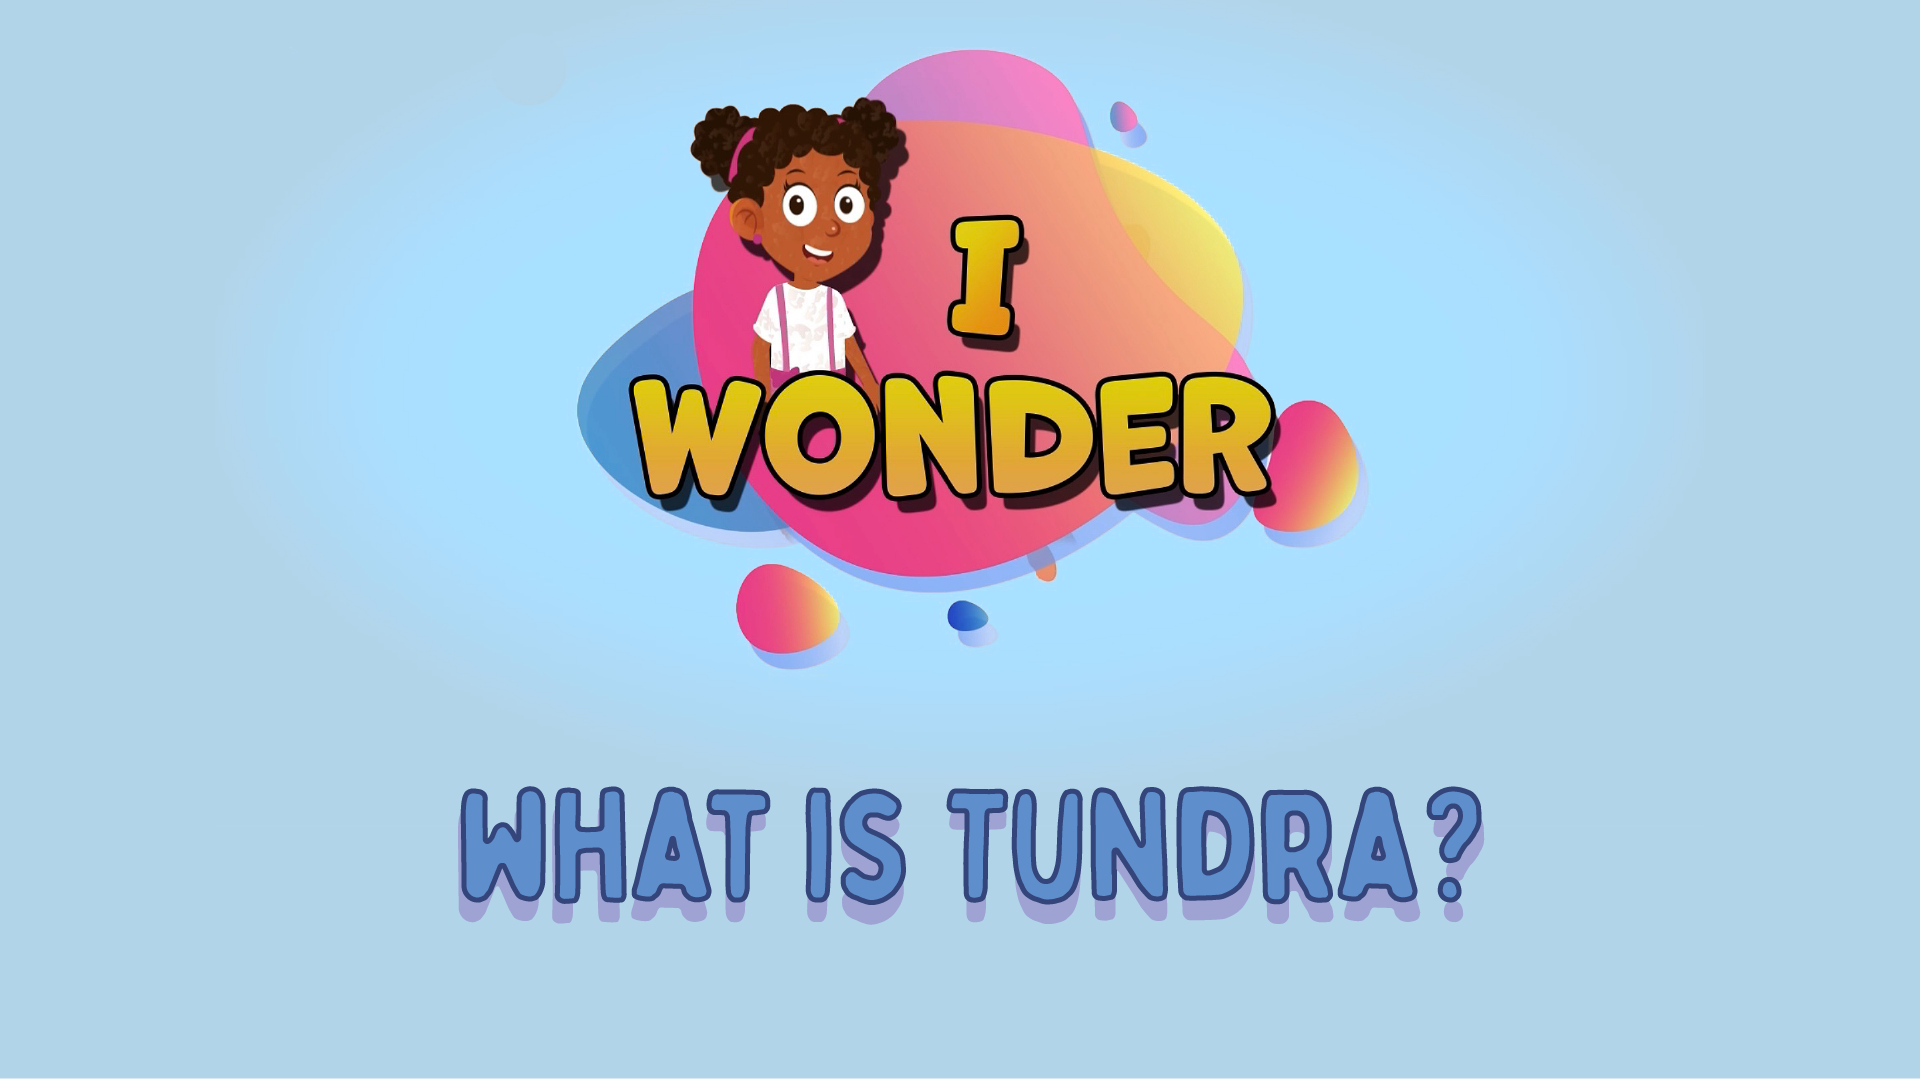 What Is Tundra?